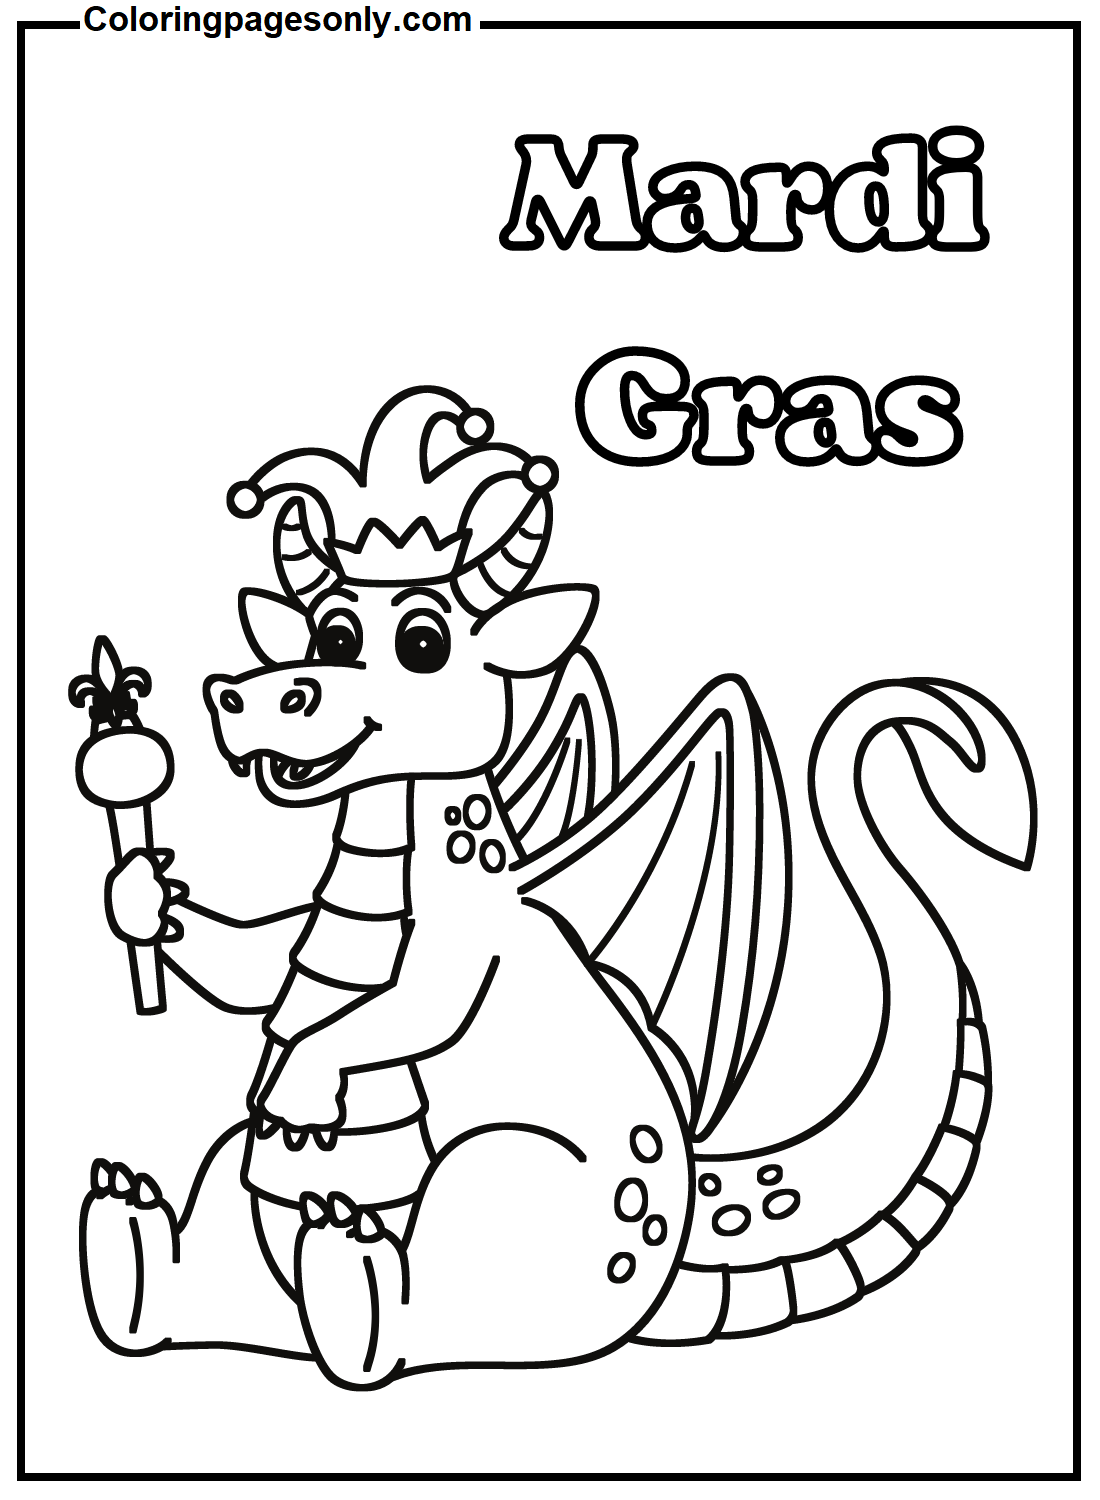 Mardi Gras Crown King Crocodile Coloring Pages